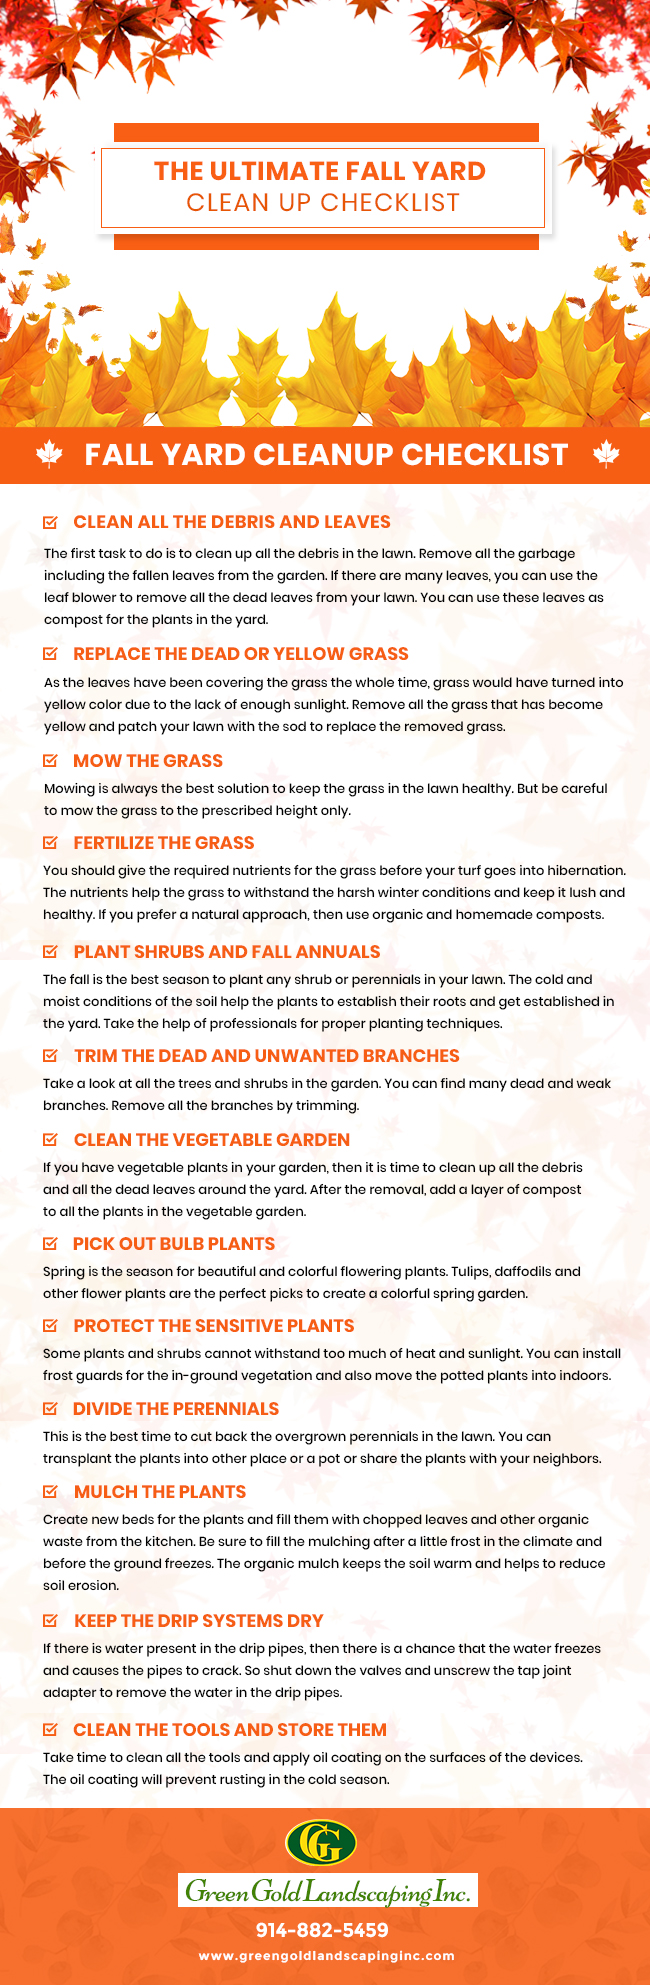 Fall Cleanup Landscaping Checklist Infographic - green gold landscaping